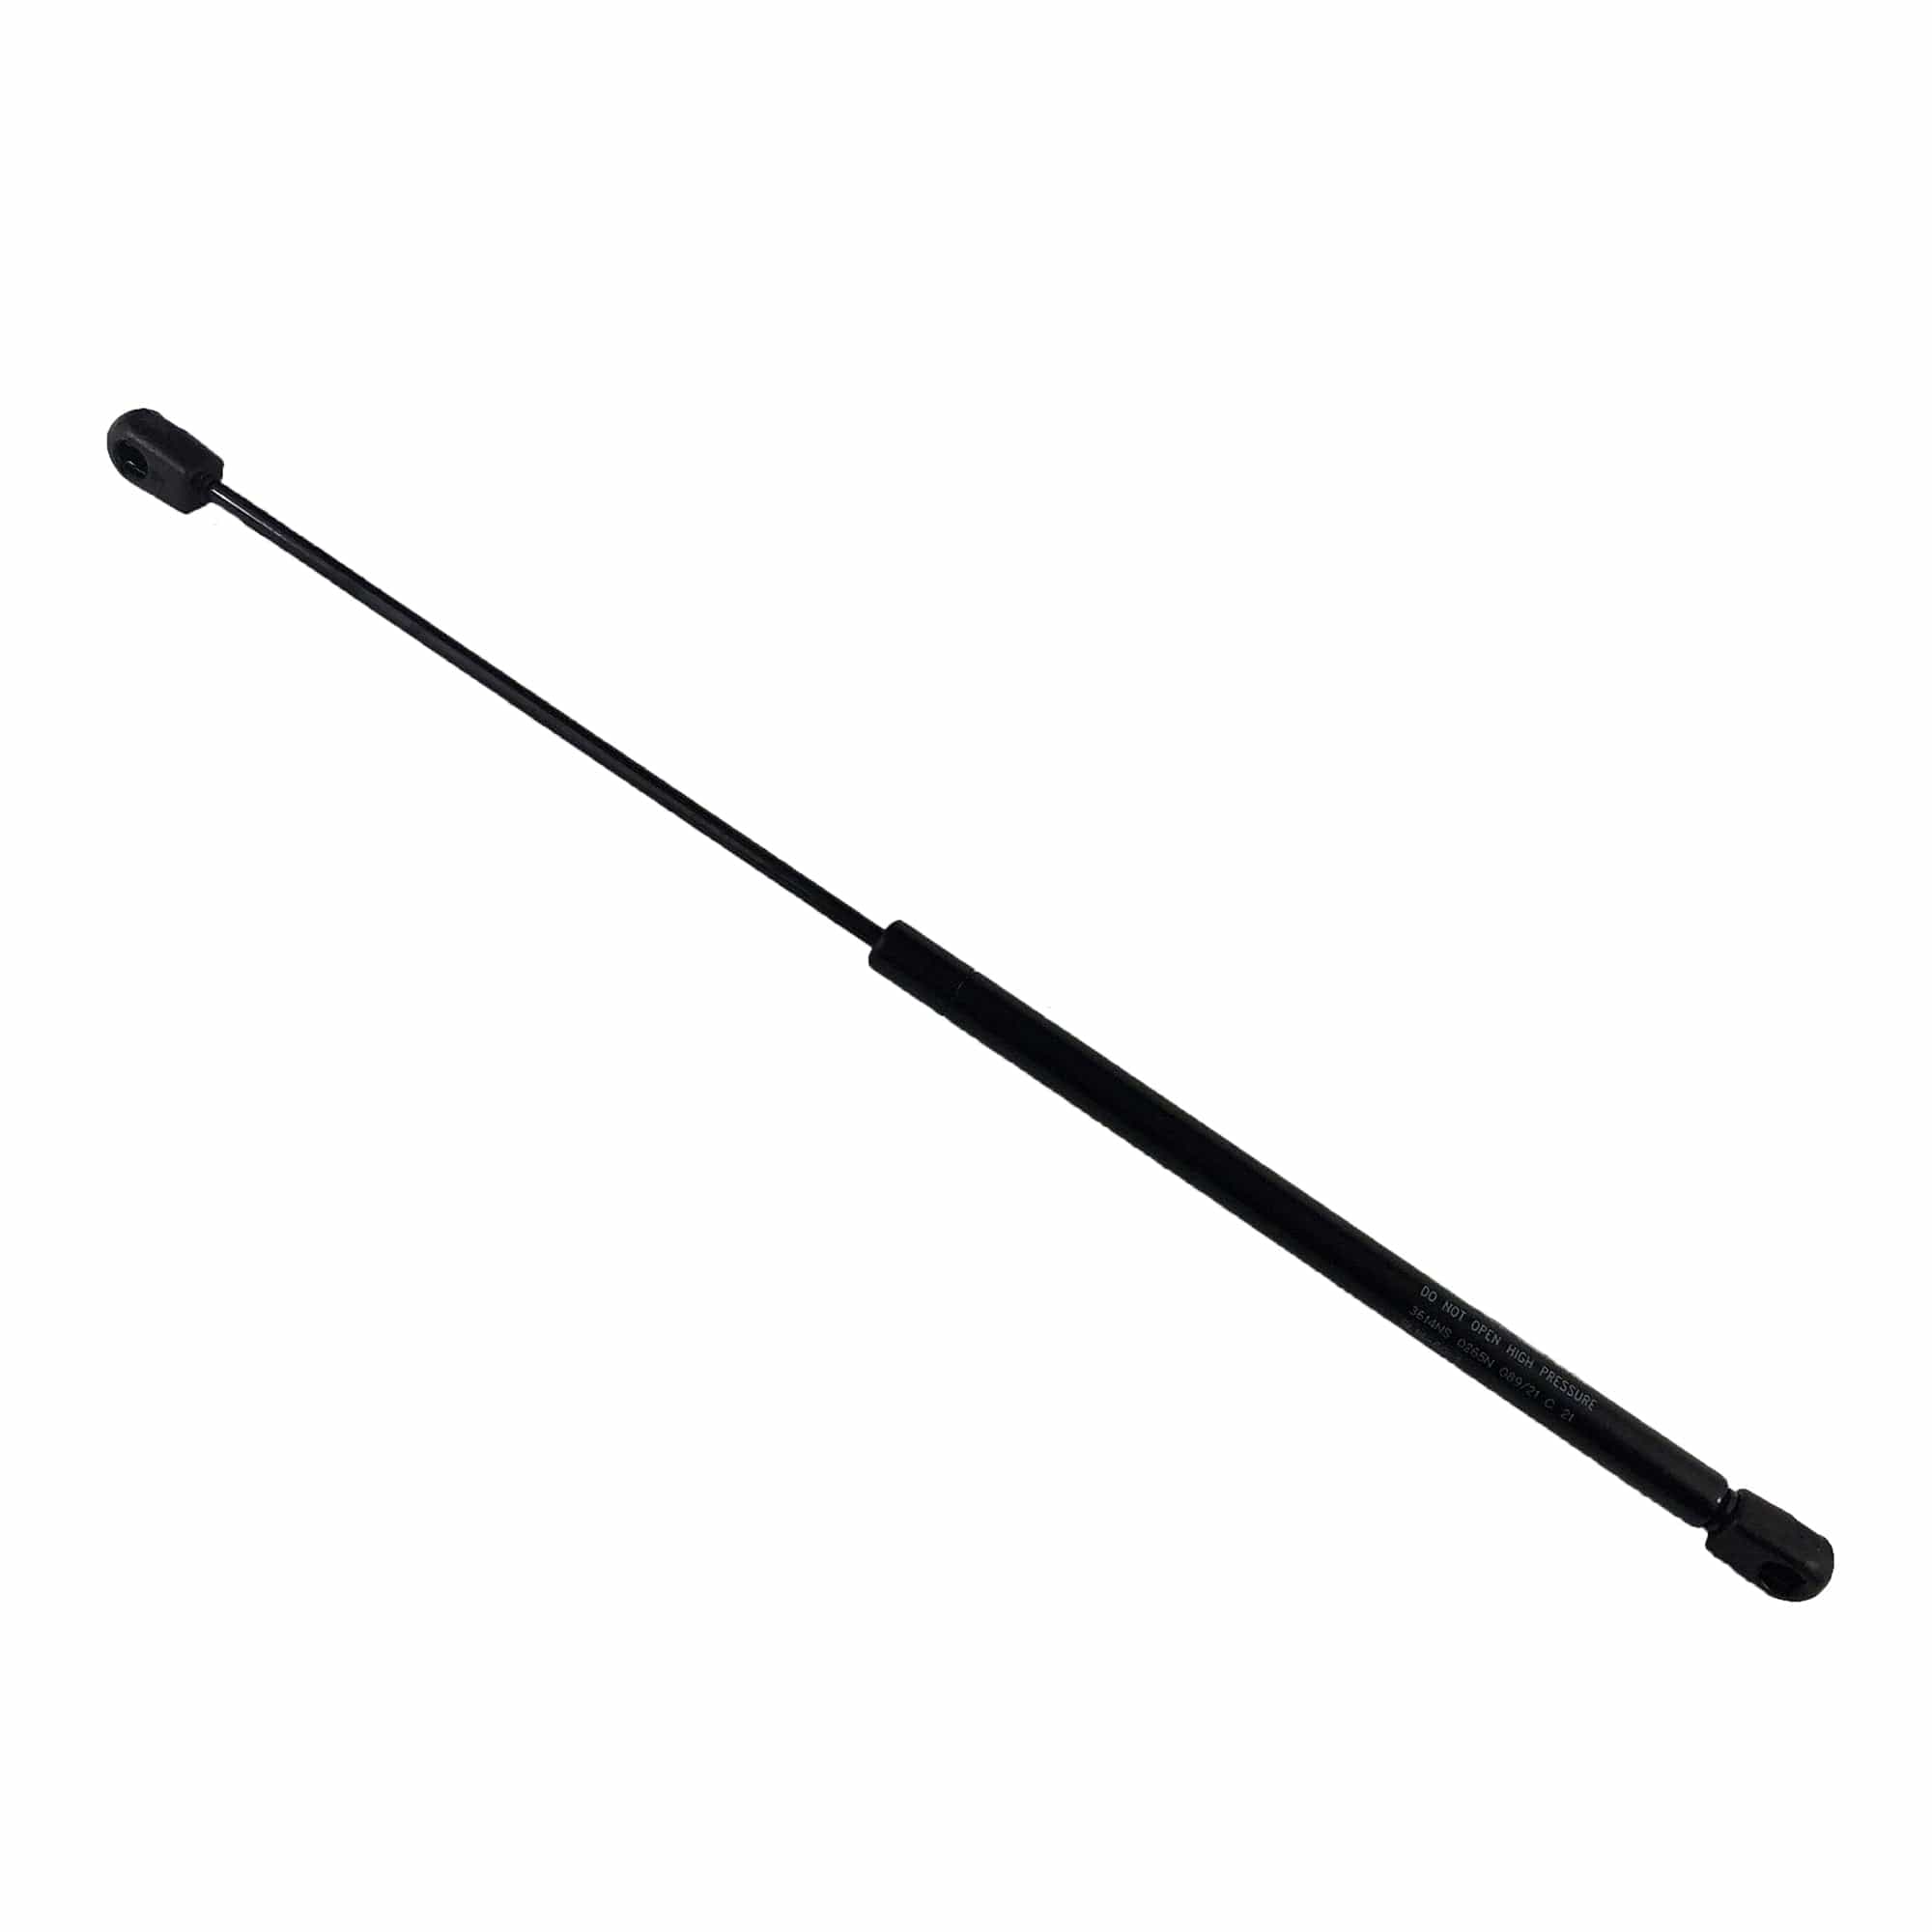 Attwood SL14-60-1 Gas Spring 12" - 20" Extended, Black